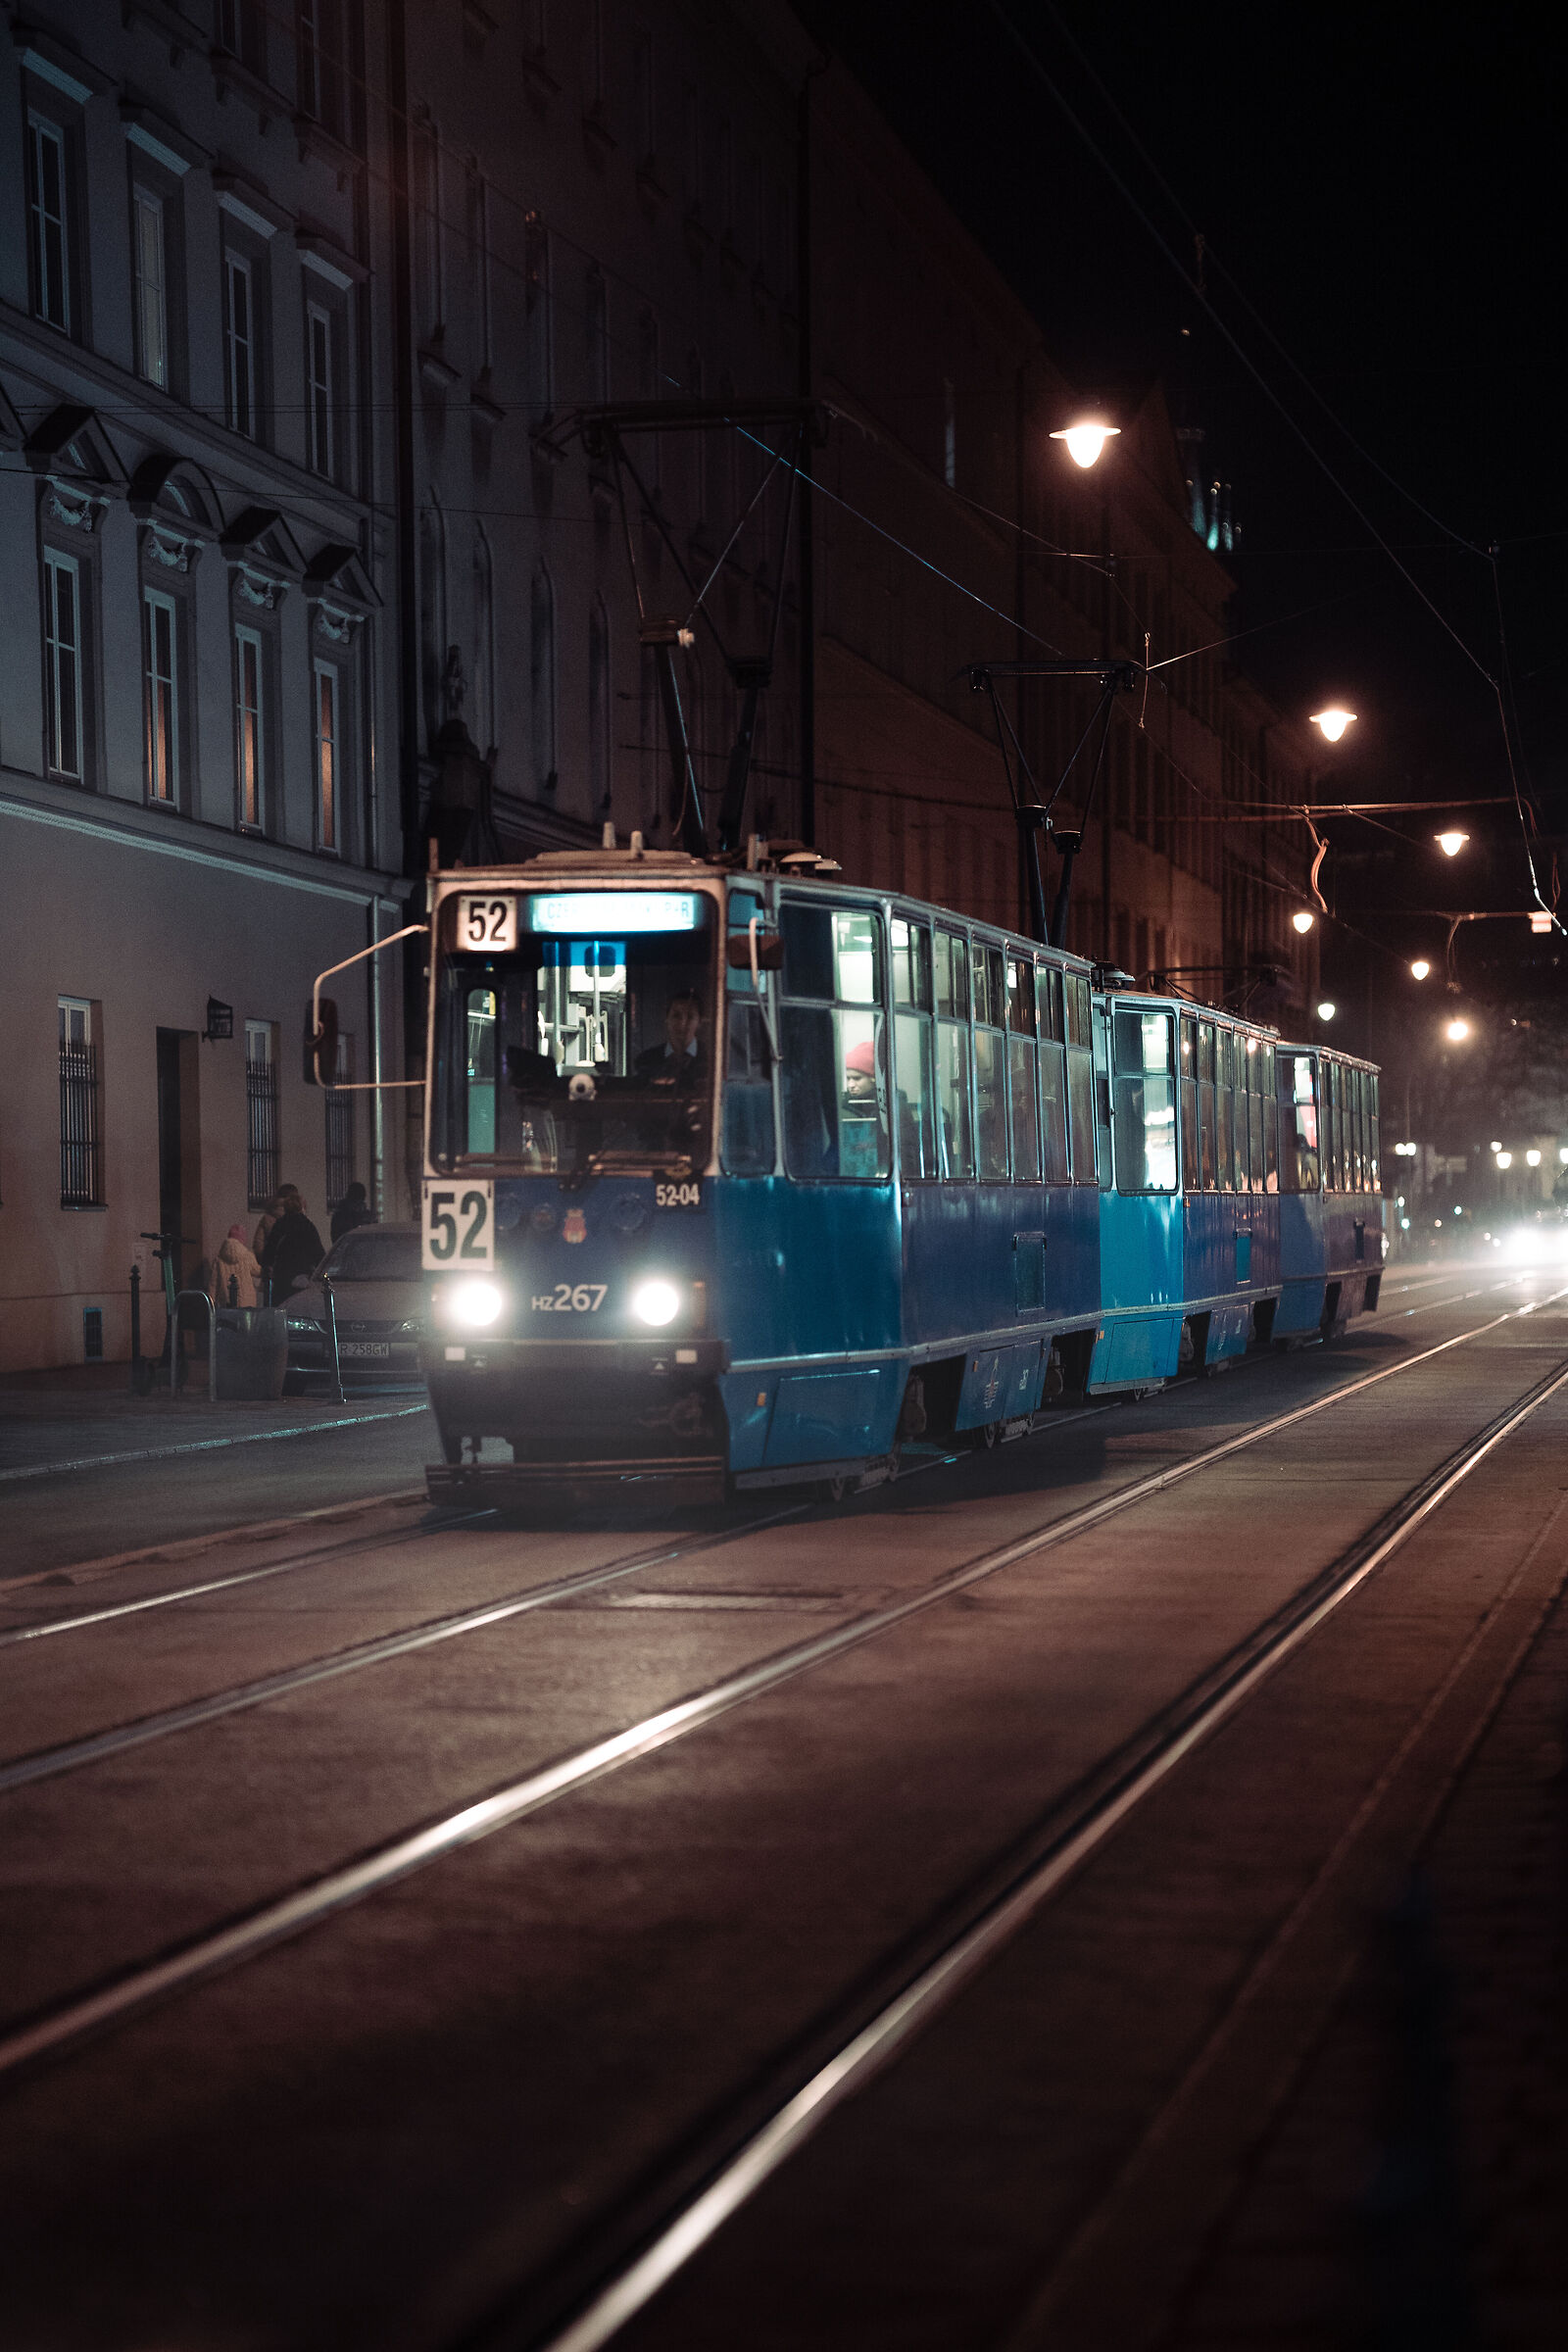 The tram at night...